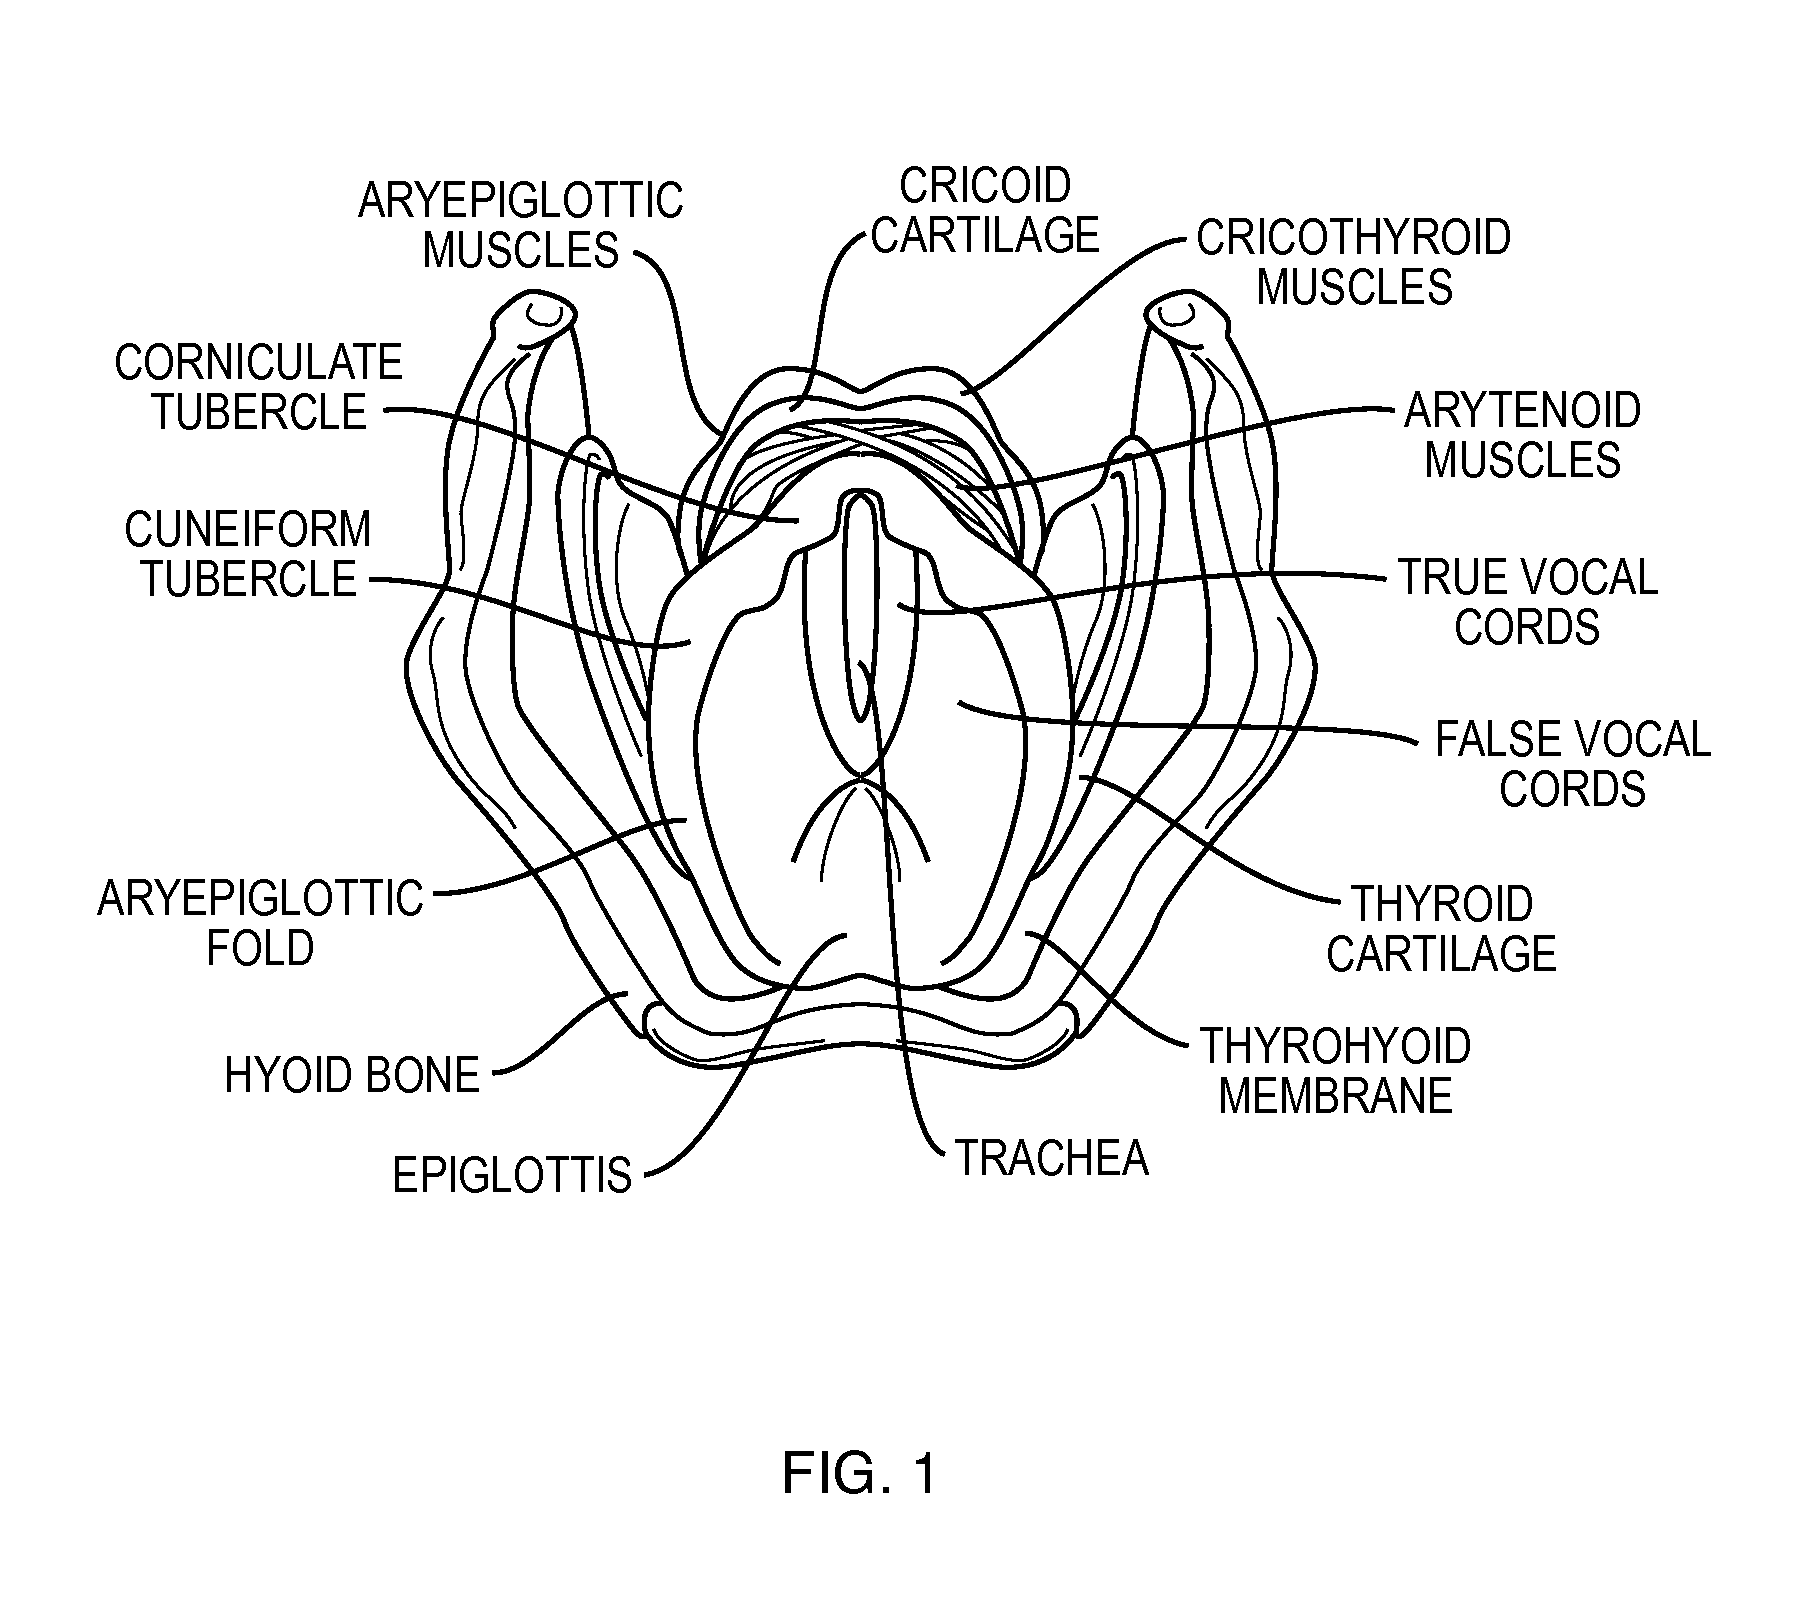 Stabilizing implant with expandable segments